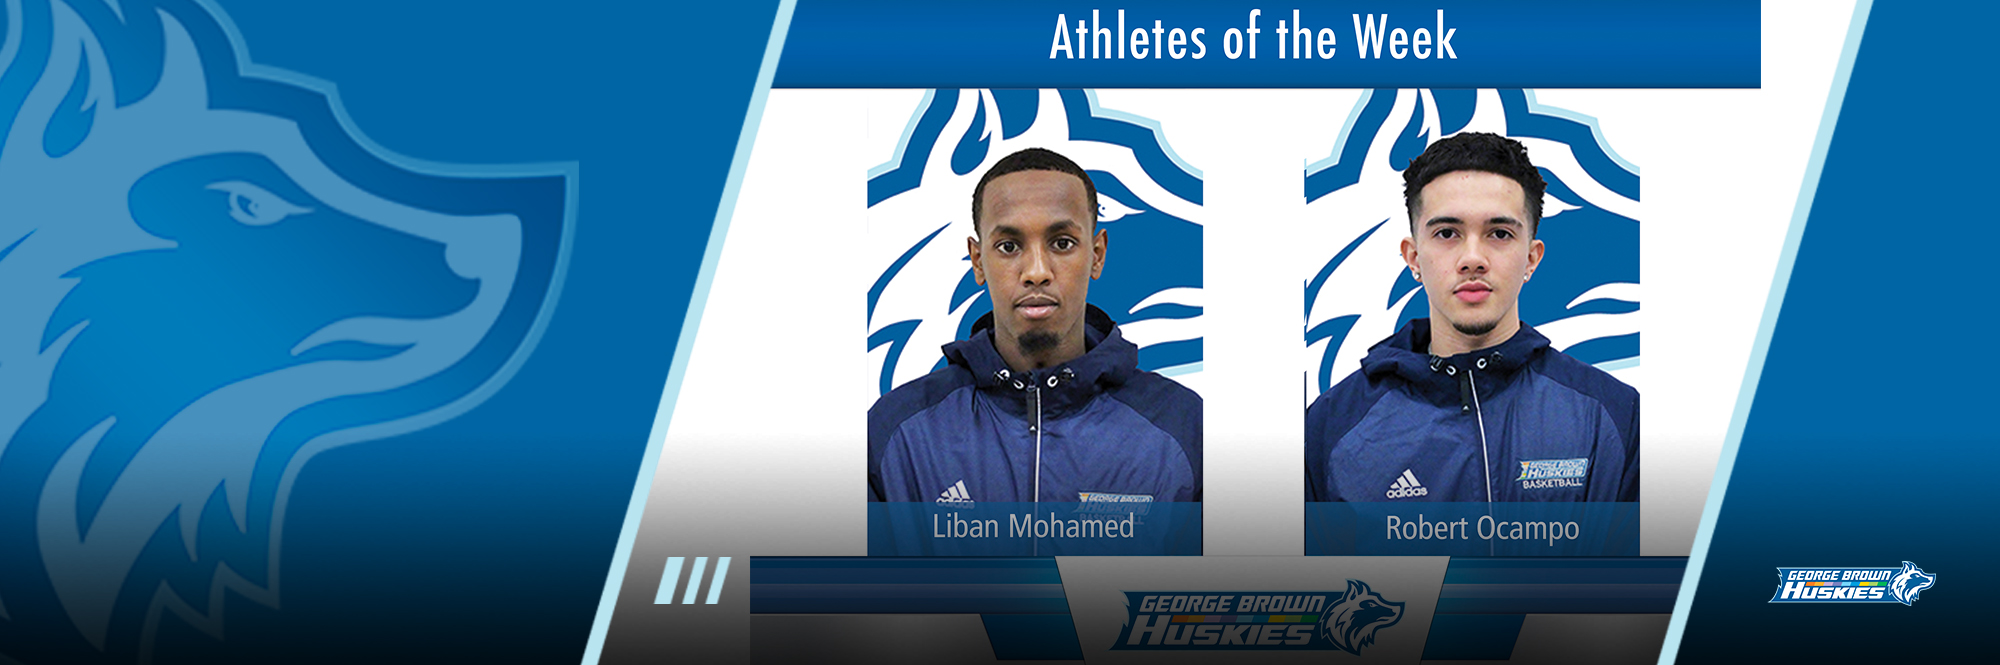 LIBAN MOHAMED, ROBERT OCAMPO STAR AT WEST/WEST CLASSIC TO EARN HUSKIES ATHLETE OF THE WEEK HONOURS